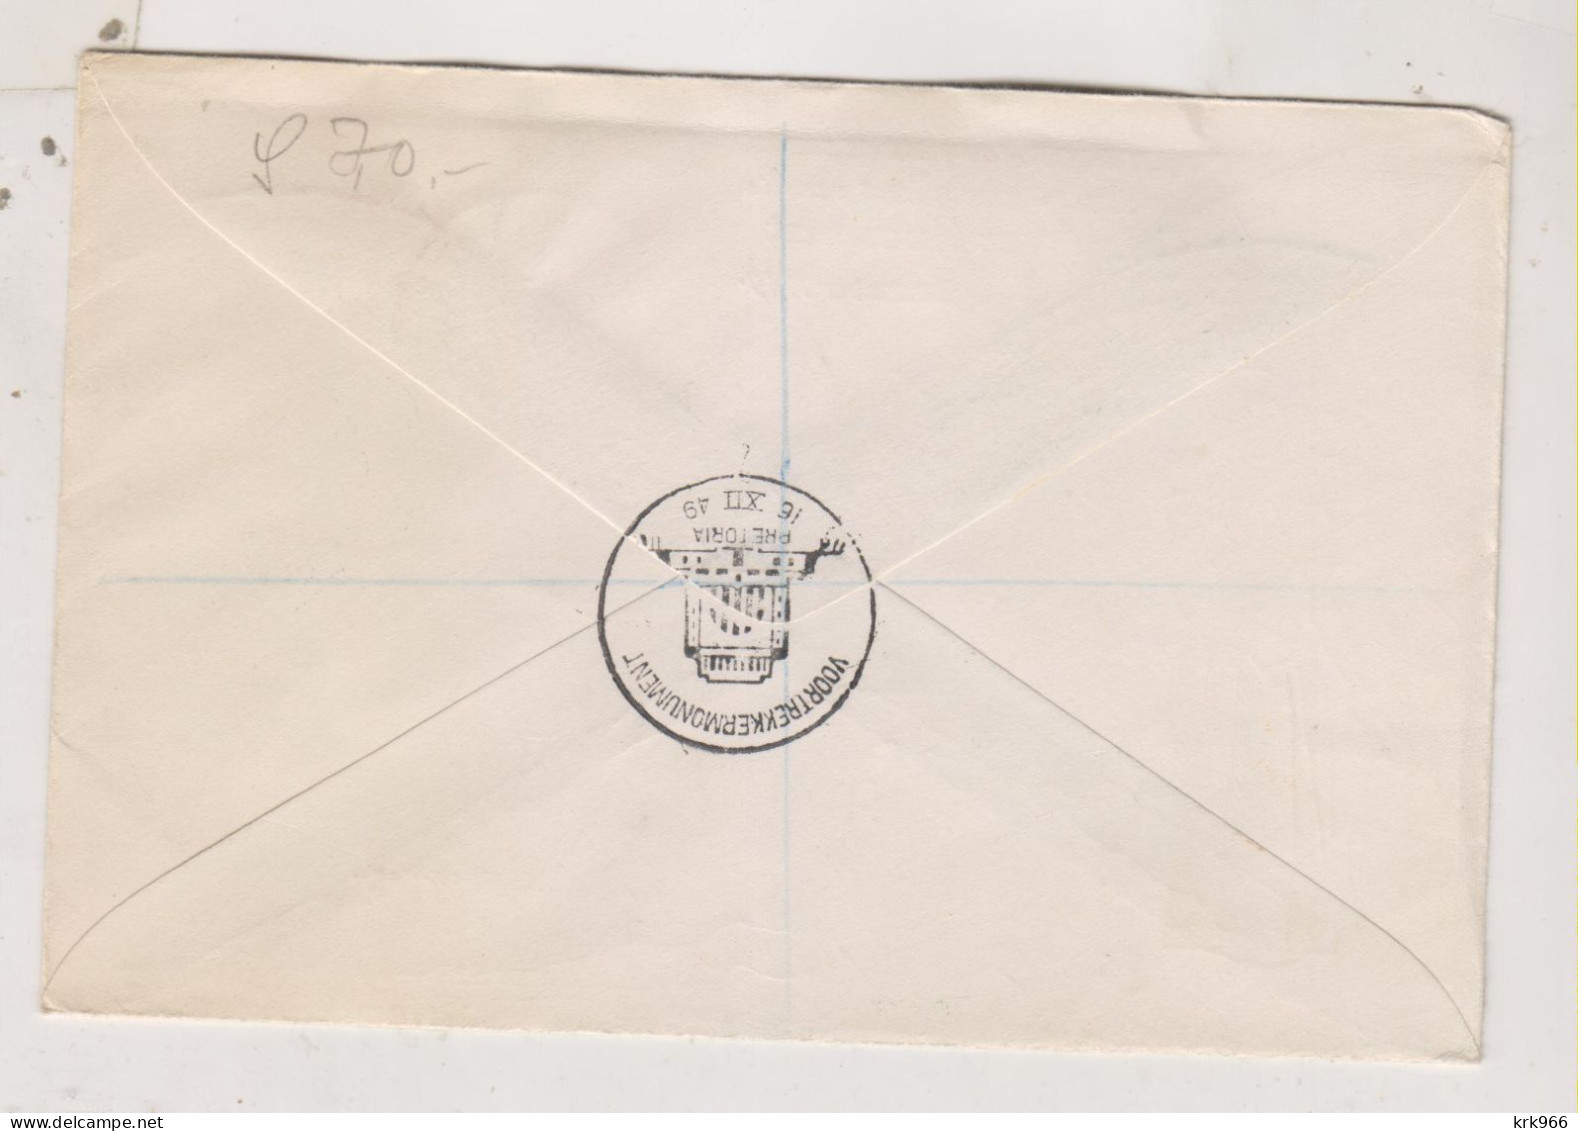 SOUTH AFRICA 1949 PRETORIA Nice Registered FDC Cover - Luchtpost